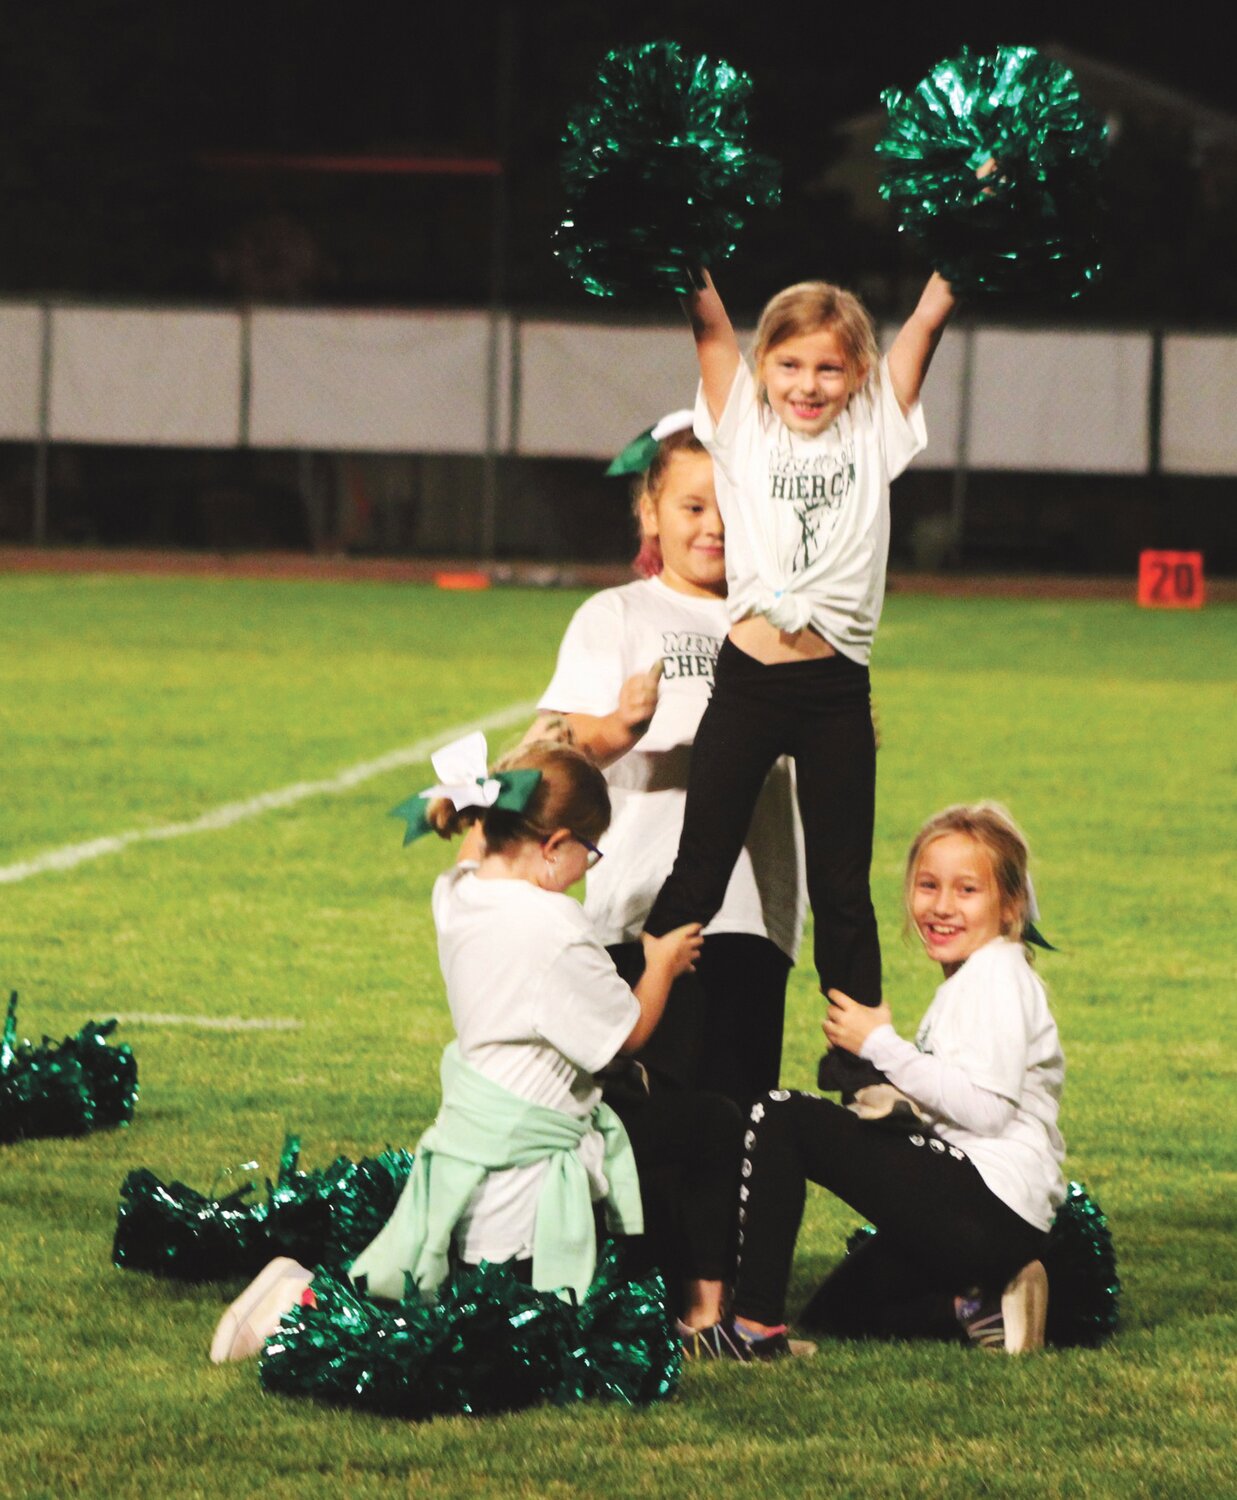 Scores of Mini Goats cheerleaders performed at halftime.
MIKE MALTAIS/WARD MEDIA